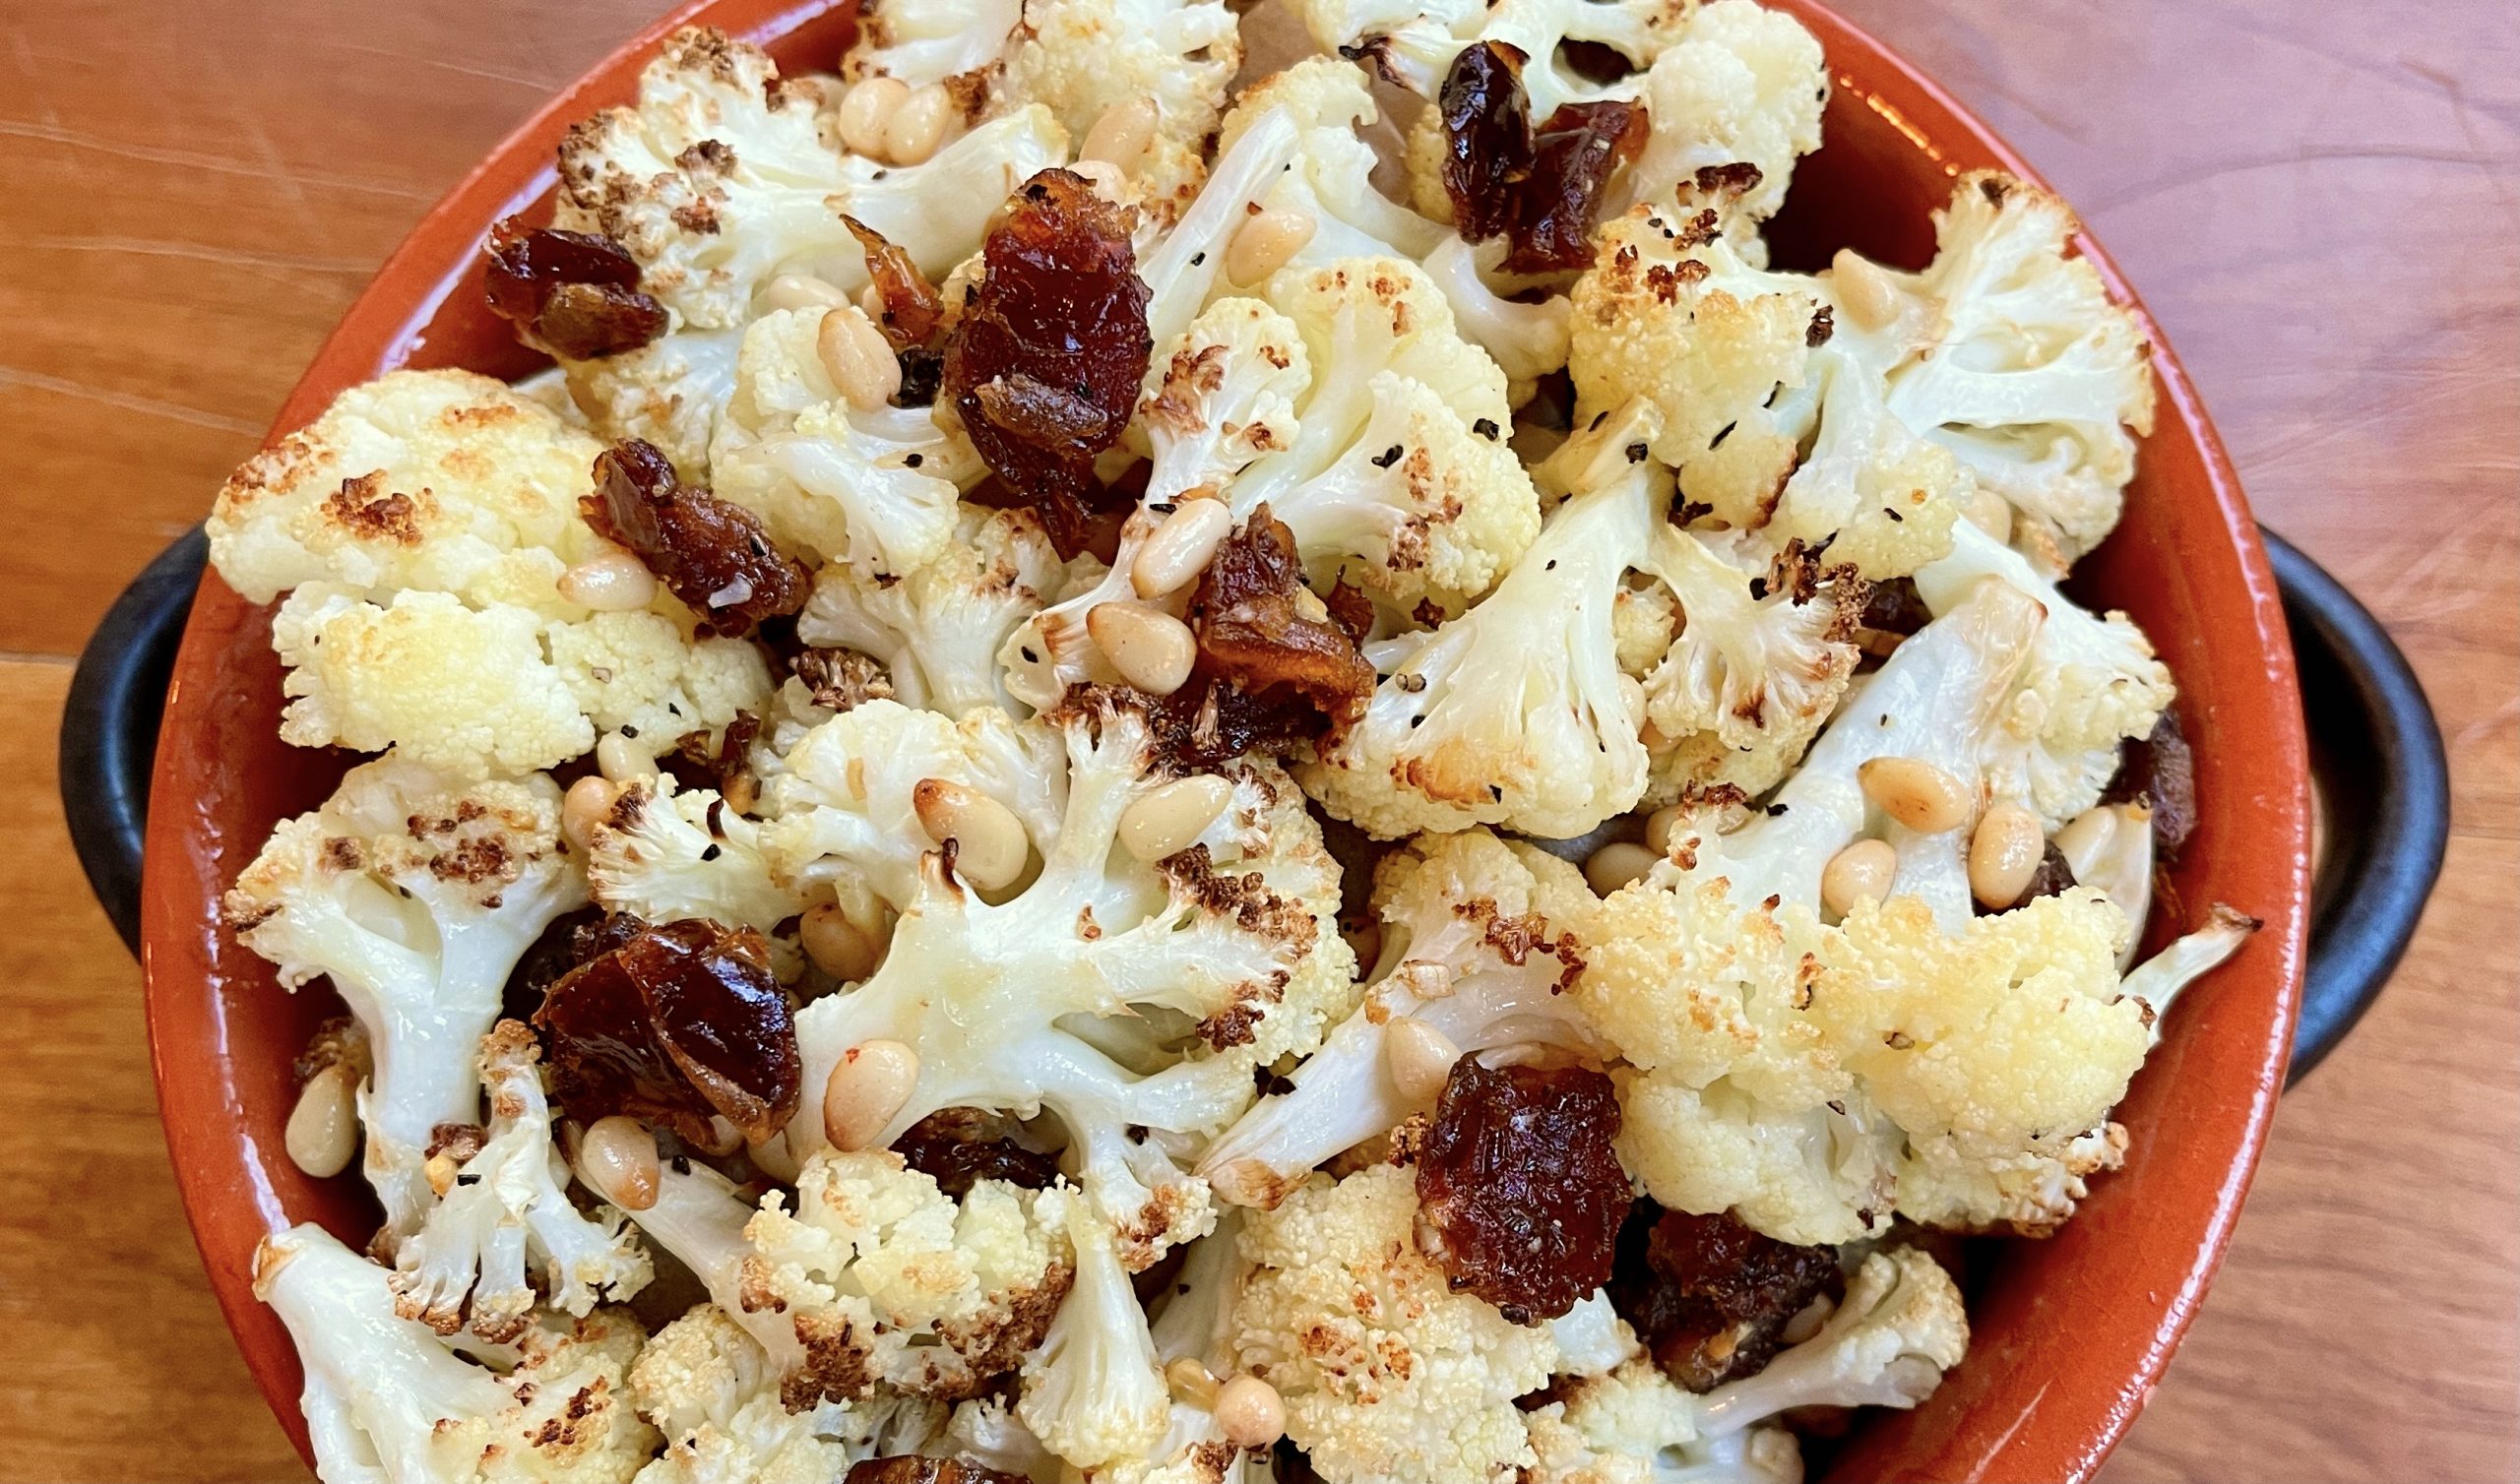 Roasted Cauliflower with Dates and Pine Nuts